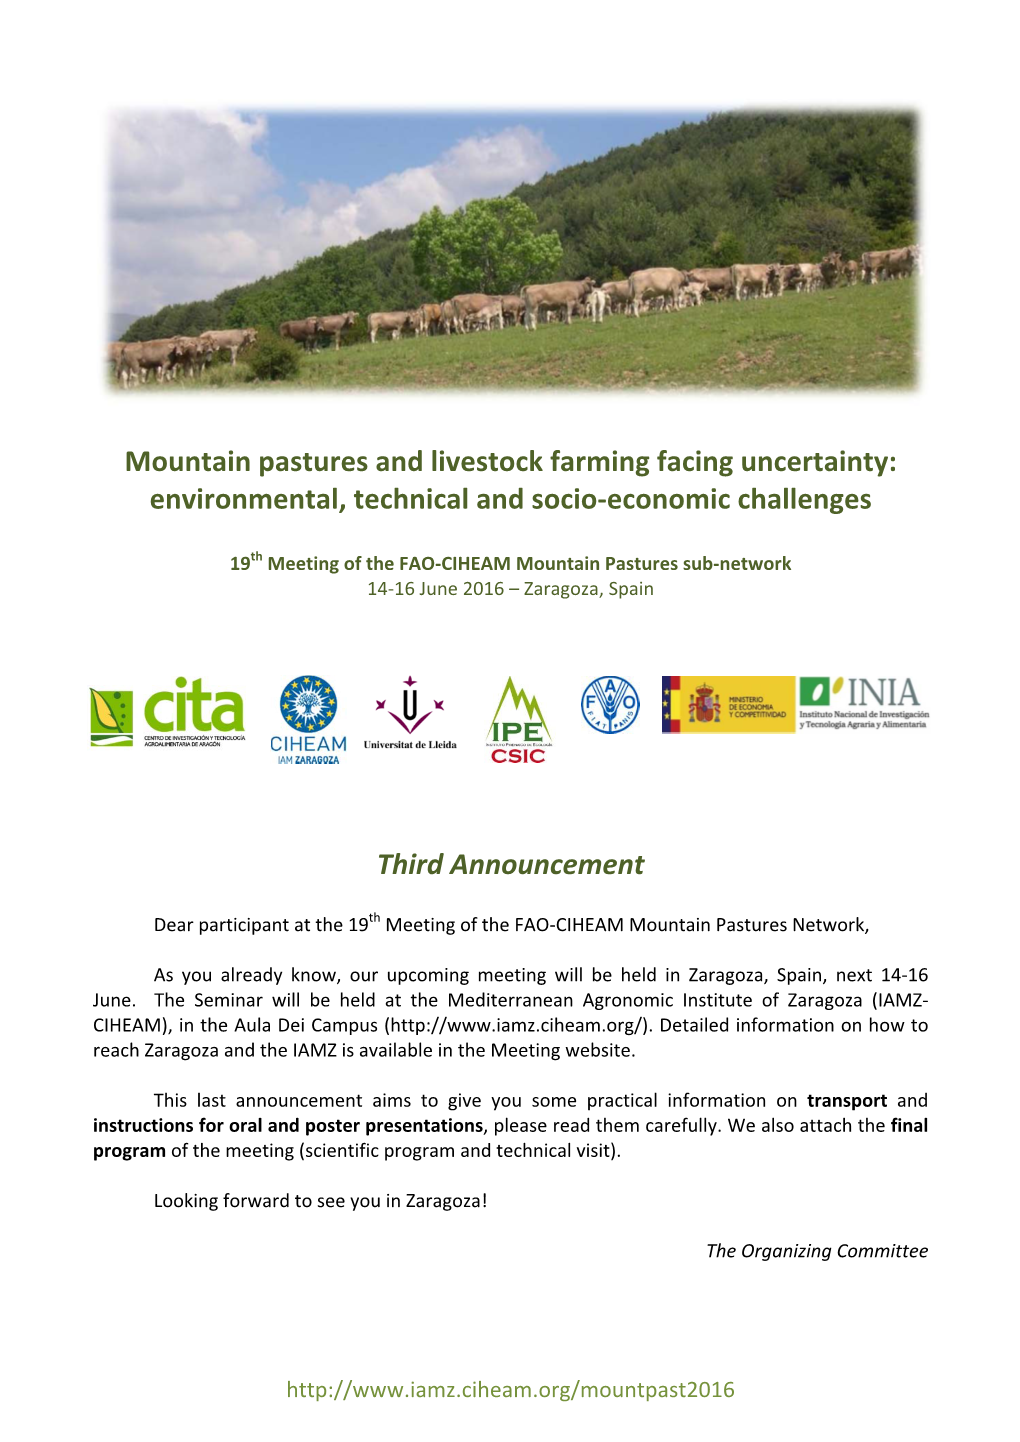 Mountain Pastures and Livestock Farming Facing Uncertainty: Environmental, Technical and Socio‐Economic Challenges